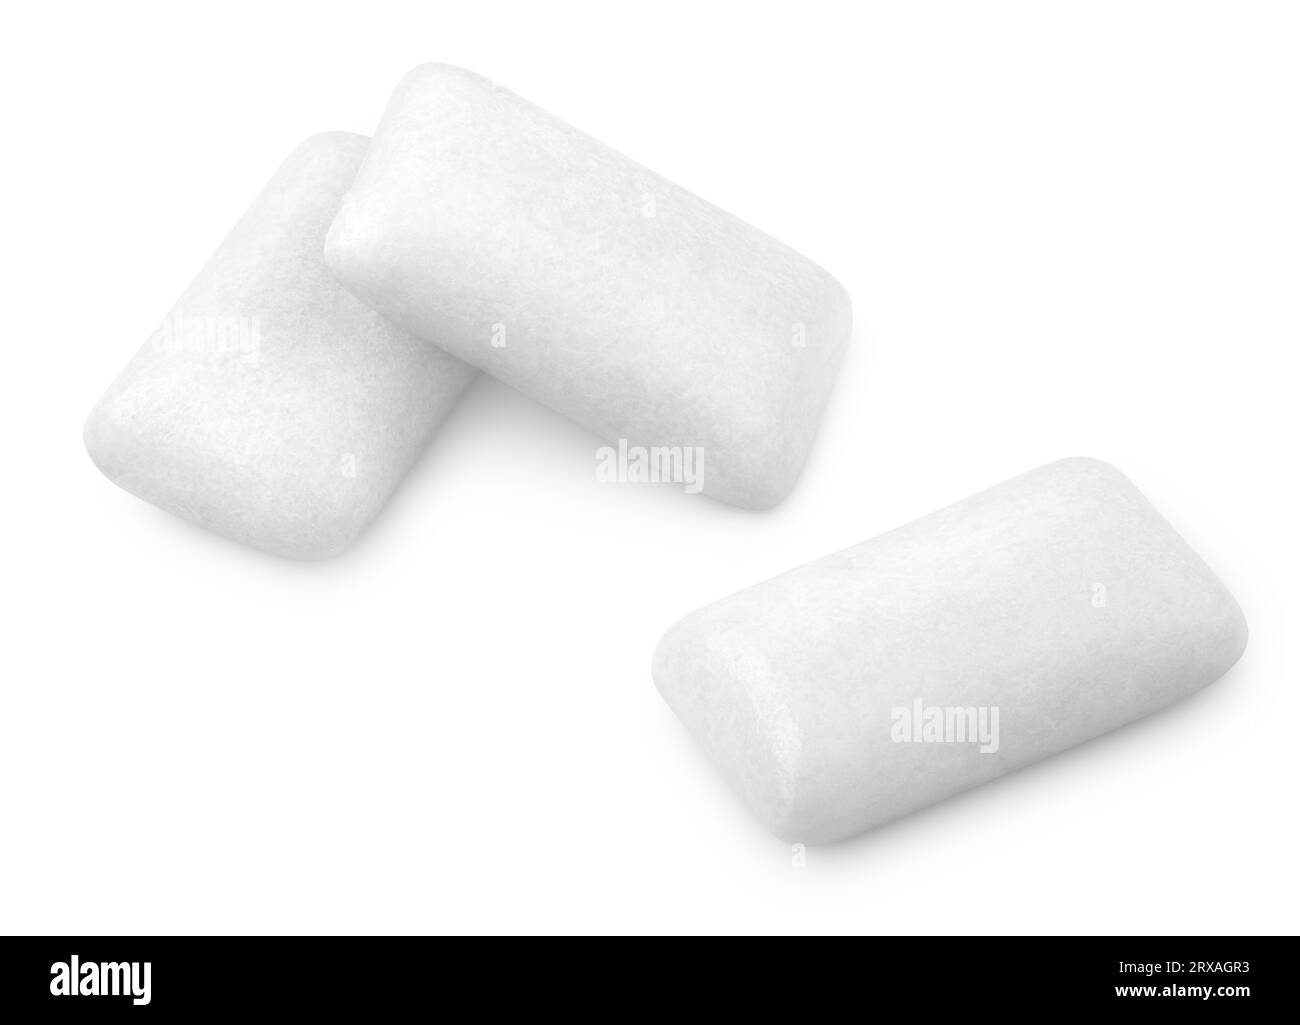 Three pieces of chewing gums isolated on white with clipping path Stock Photo